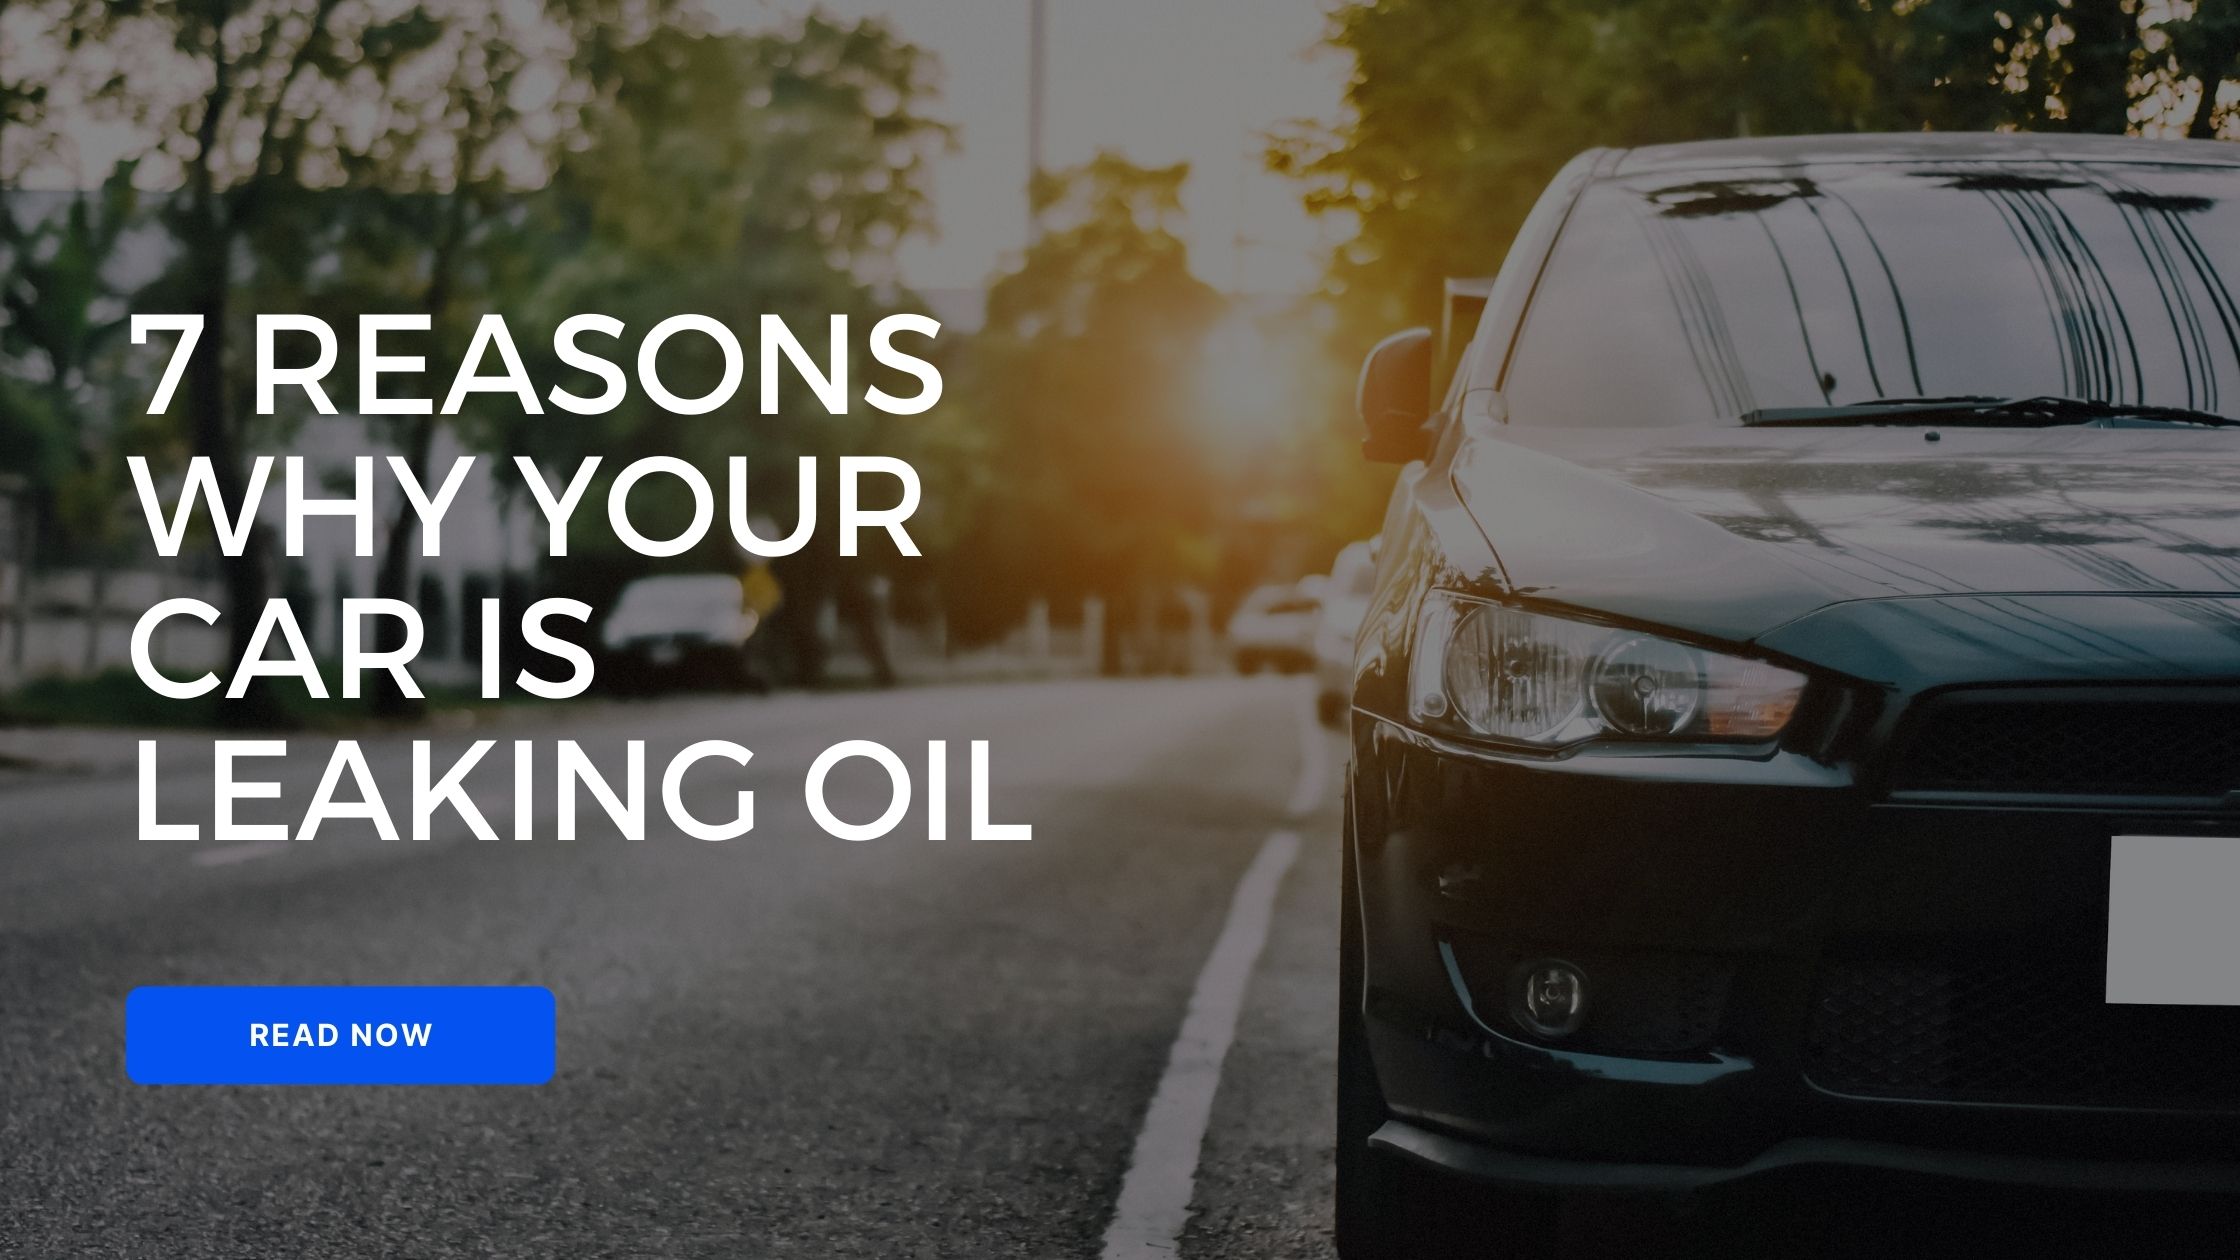 Reasons Why Your Car is Leaking Oil